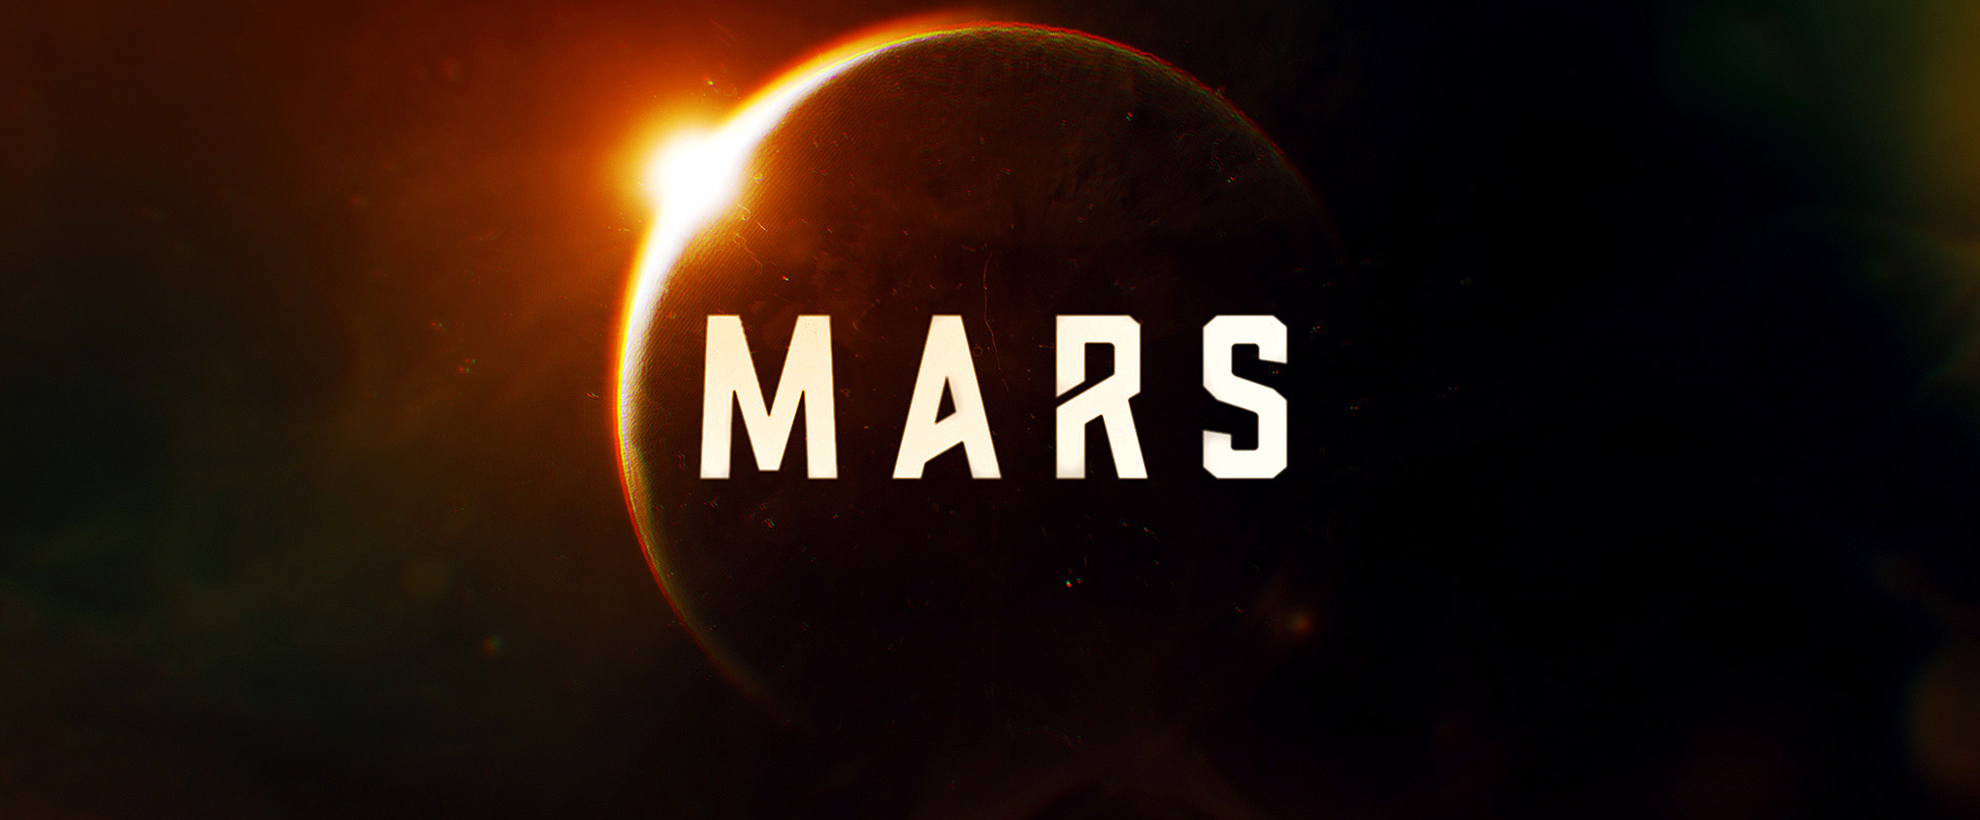 The sun peeks out behind a planet with 'MARS' in light text